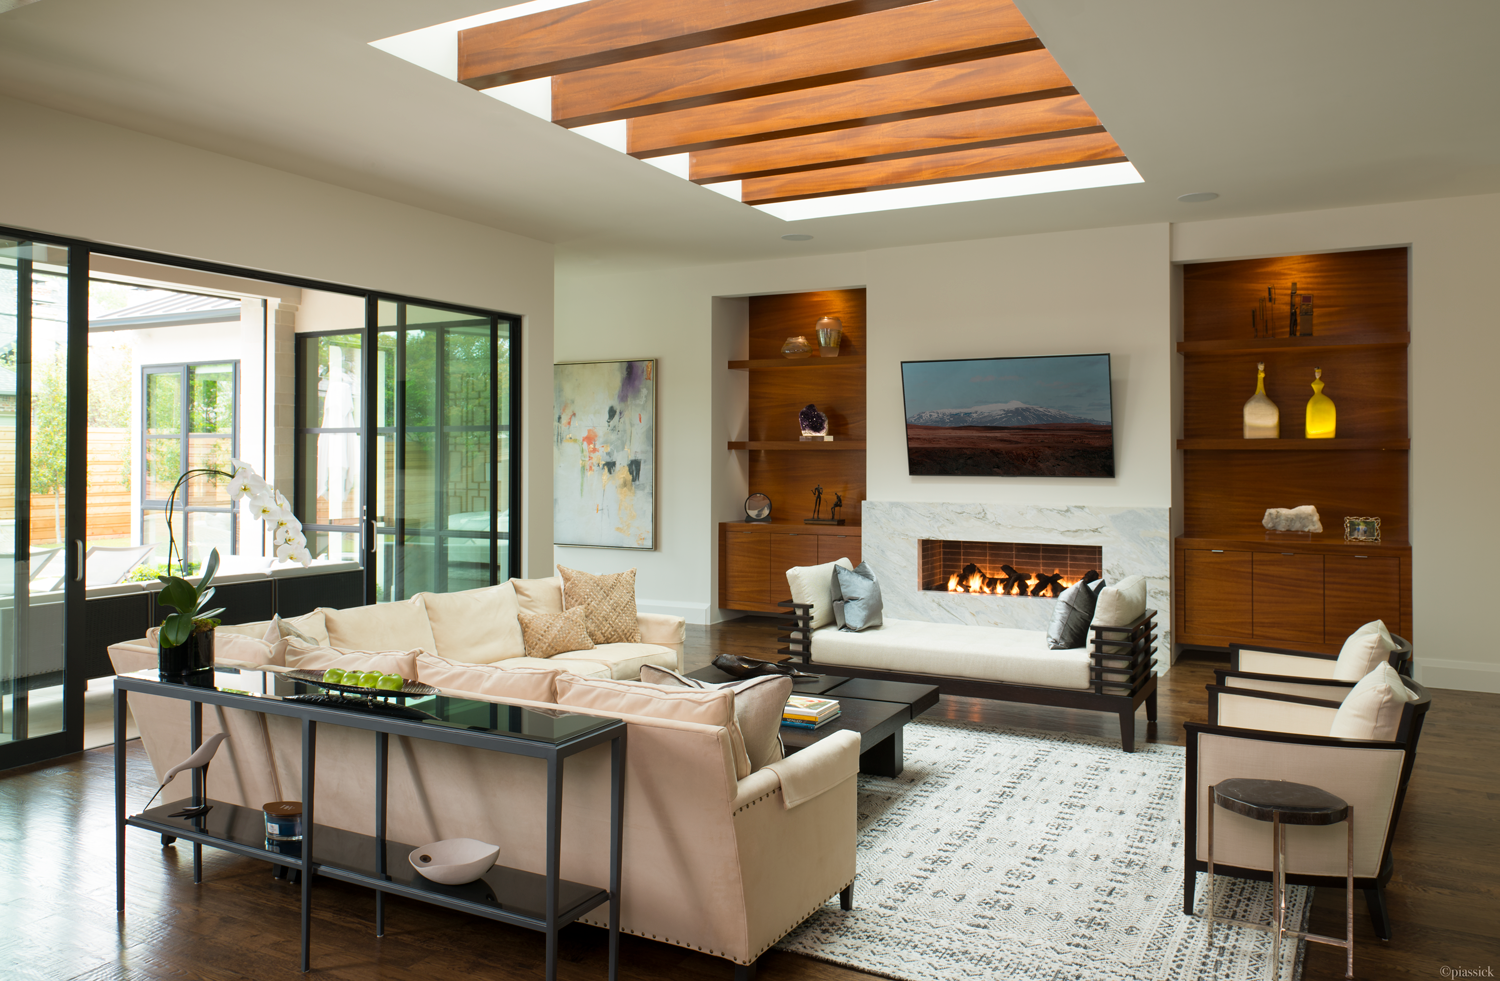 New Isokern Linear Fireplace Featured on DIY Network's 'I Want That ...